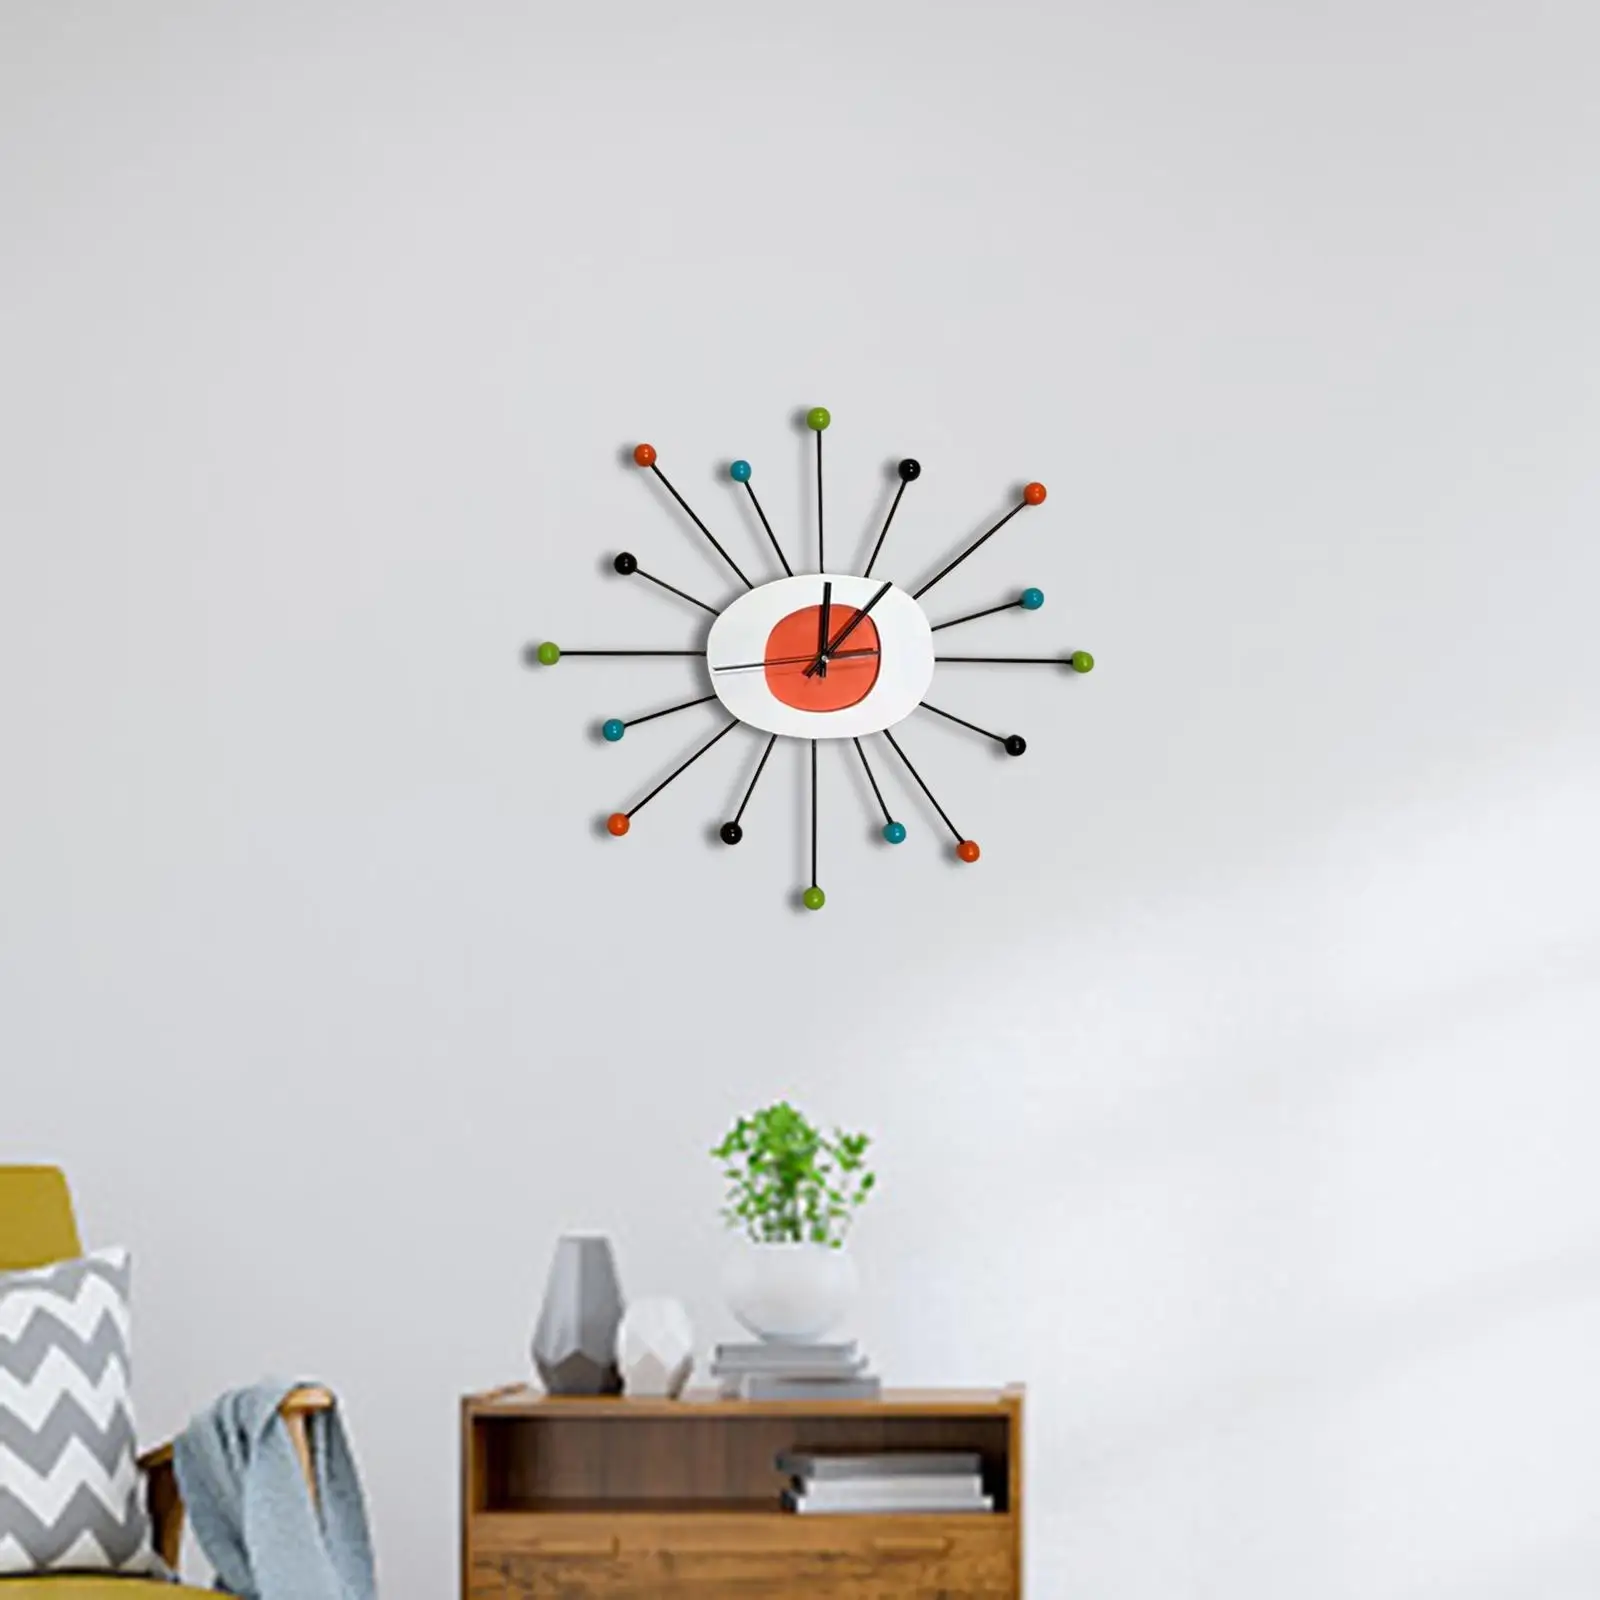 Modern Wall Clock Non Ticking Silent Decorative Colorful Ball Hanging Clocks for Bedroom Decor Hotel Home Bathroom